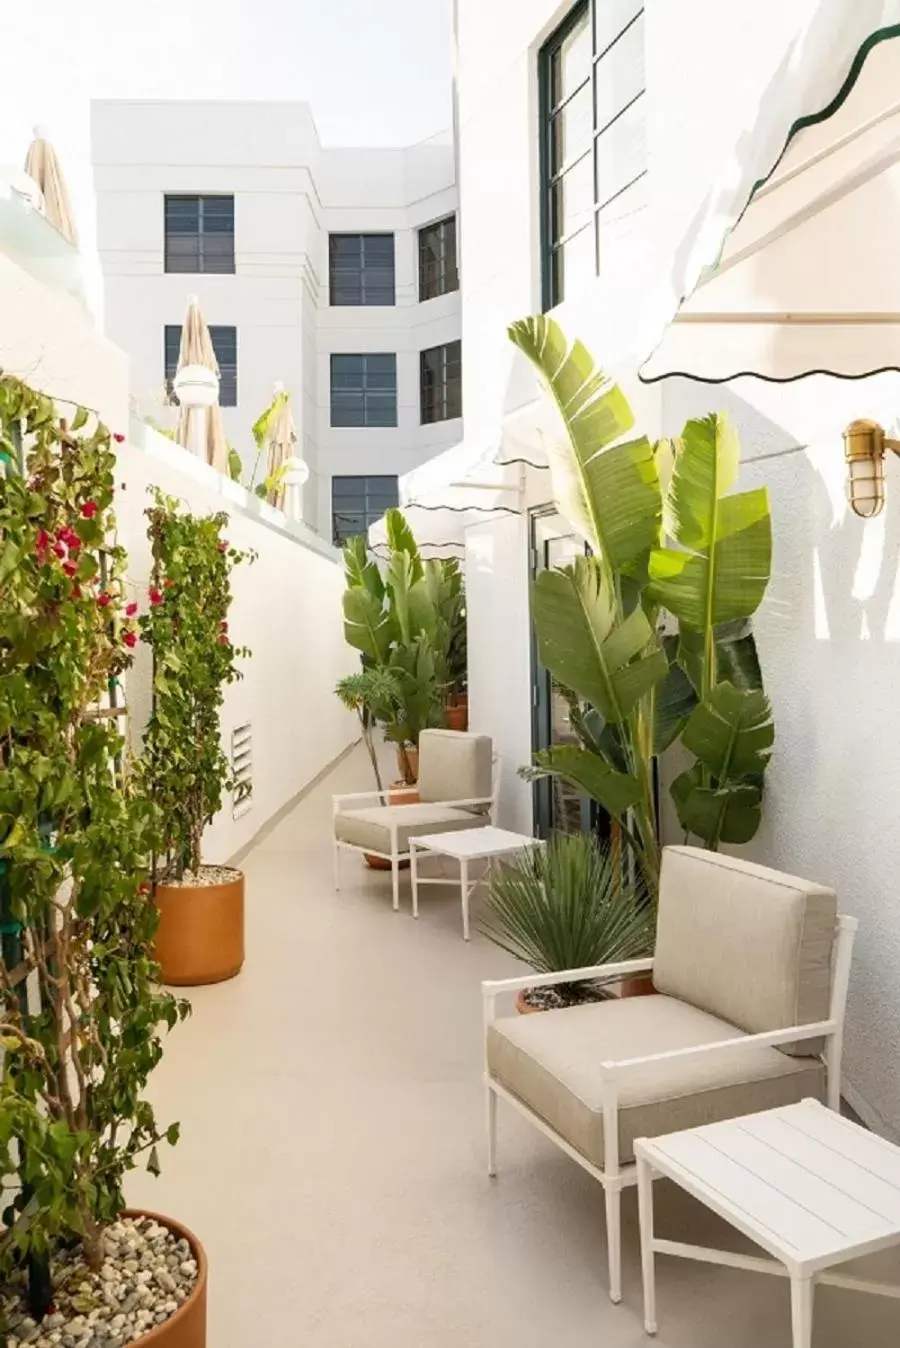 Balcony/Terrace in Palihouse West Hollywood